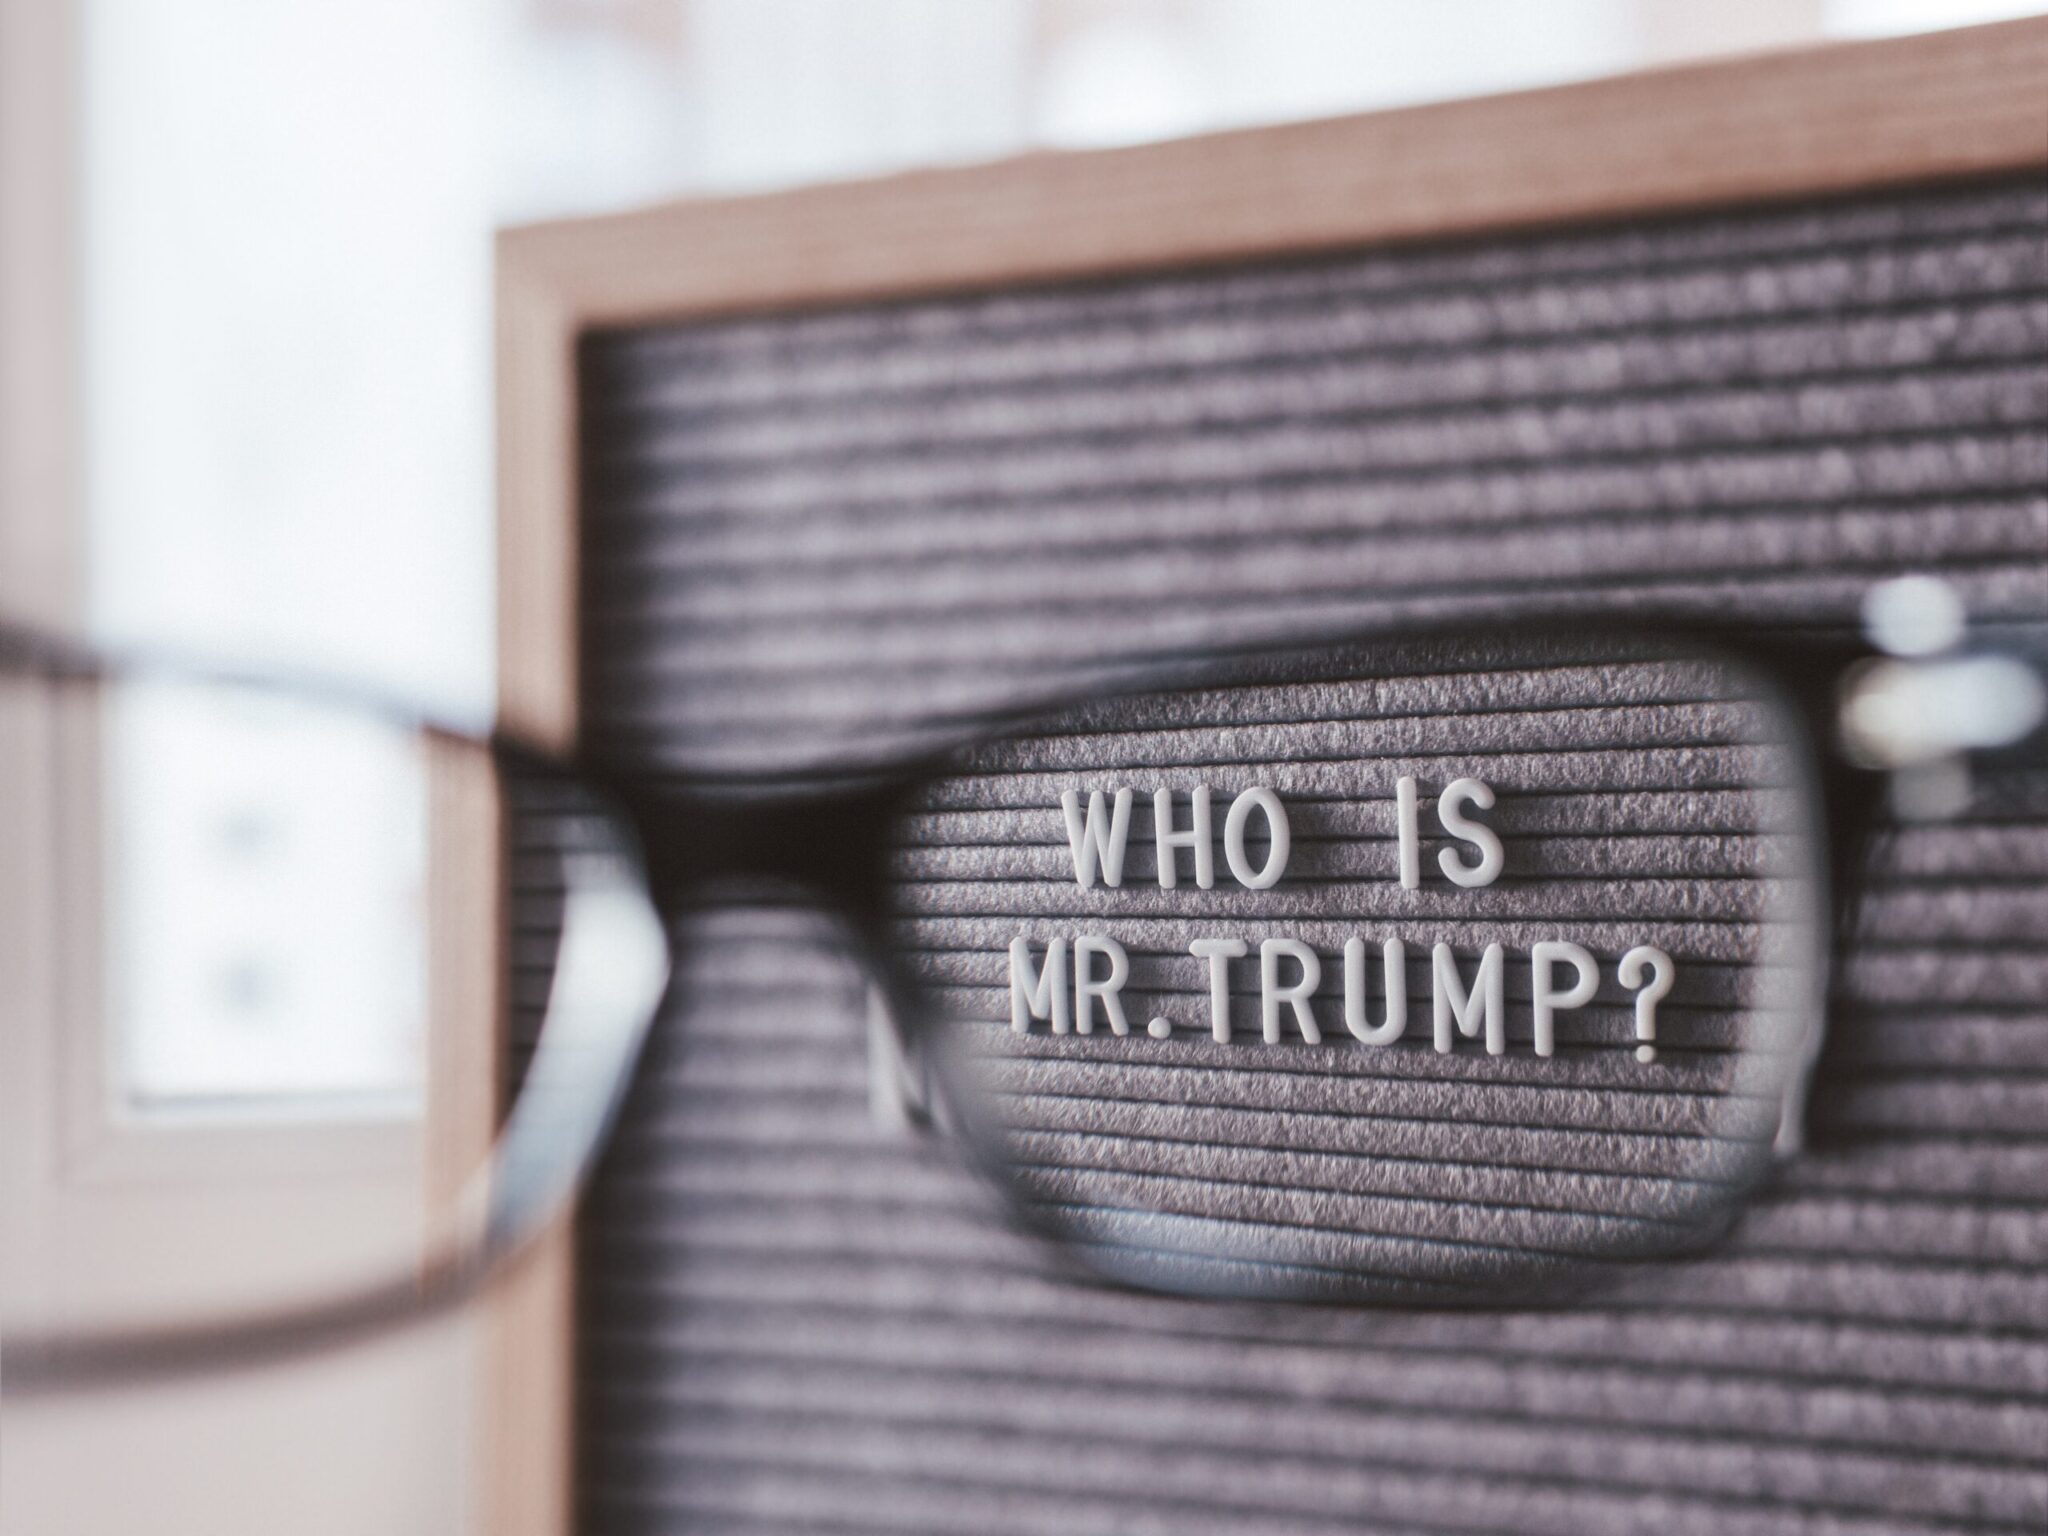 Letterboard with question WHO IS MR.TRUMP? through eyeglasses. C